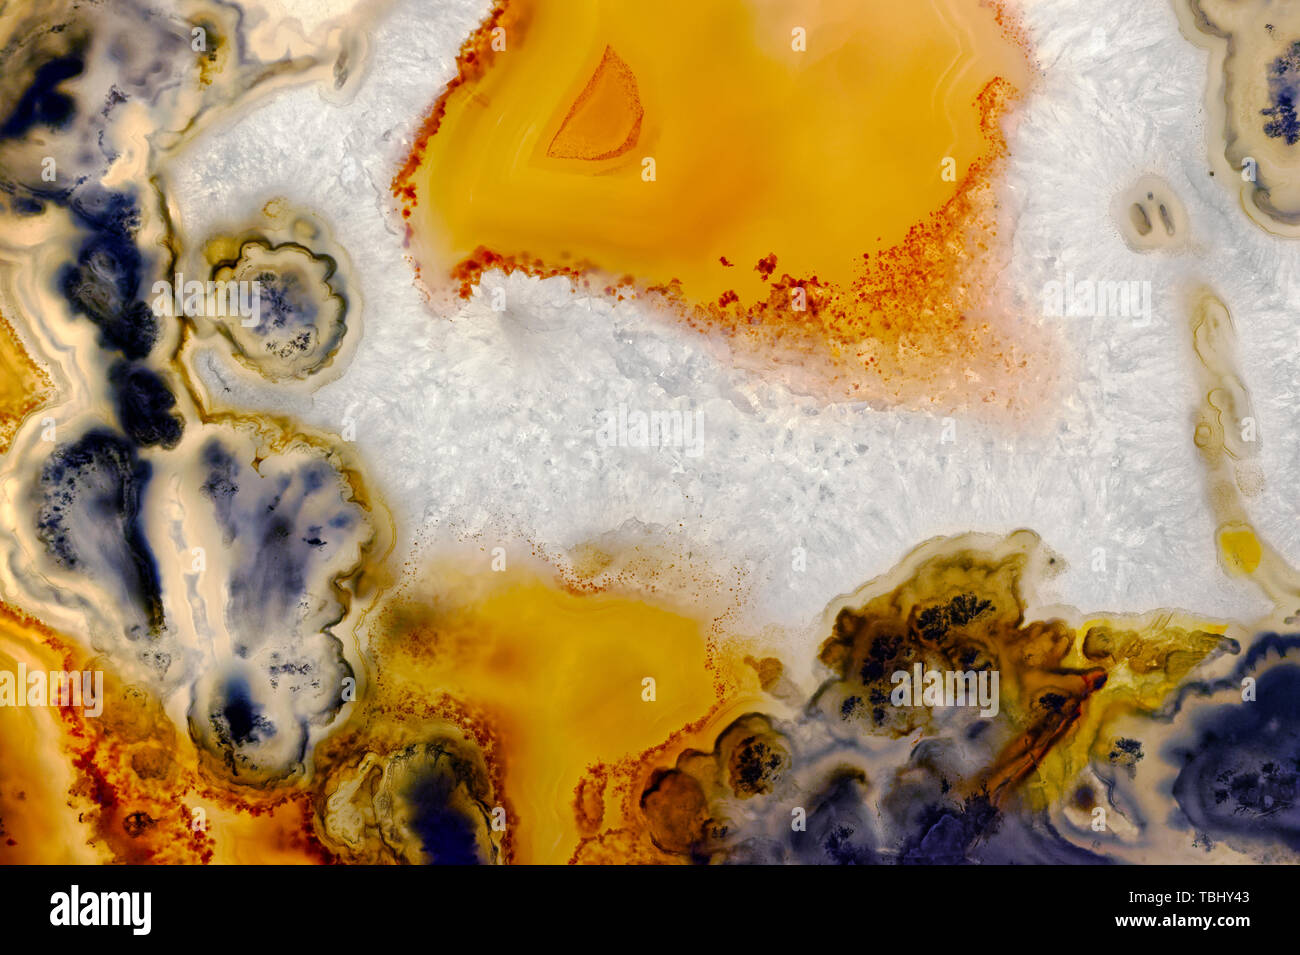 Backgrounds and textures: surface of agate or chalcedony, beautiful decorative stone, abstract pattern of cracks, spots and stains, natural background Stock Photo